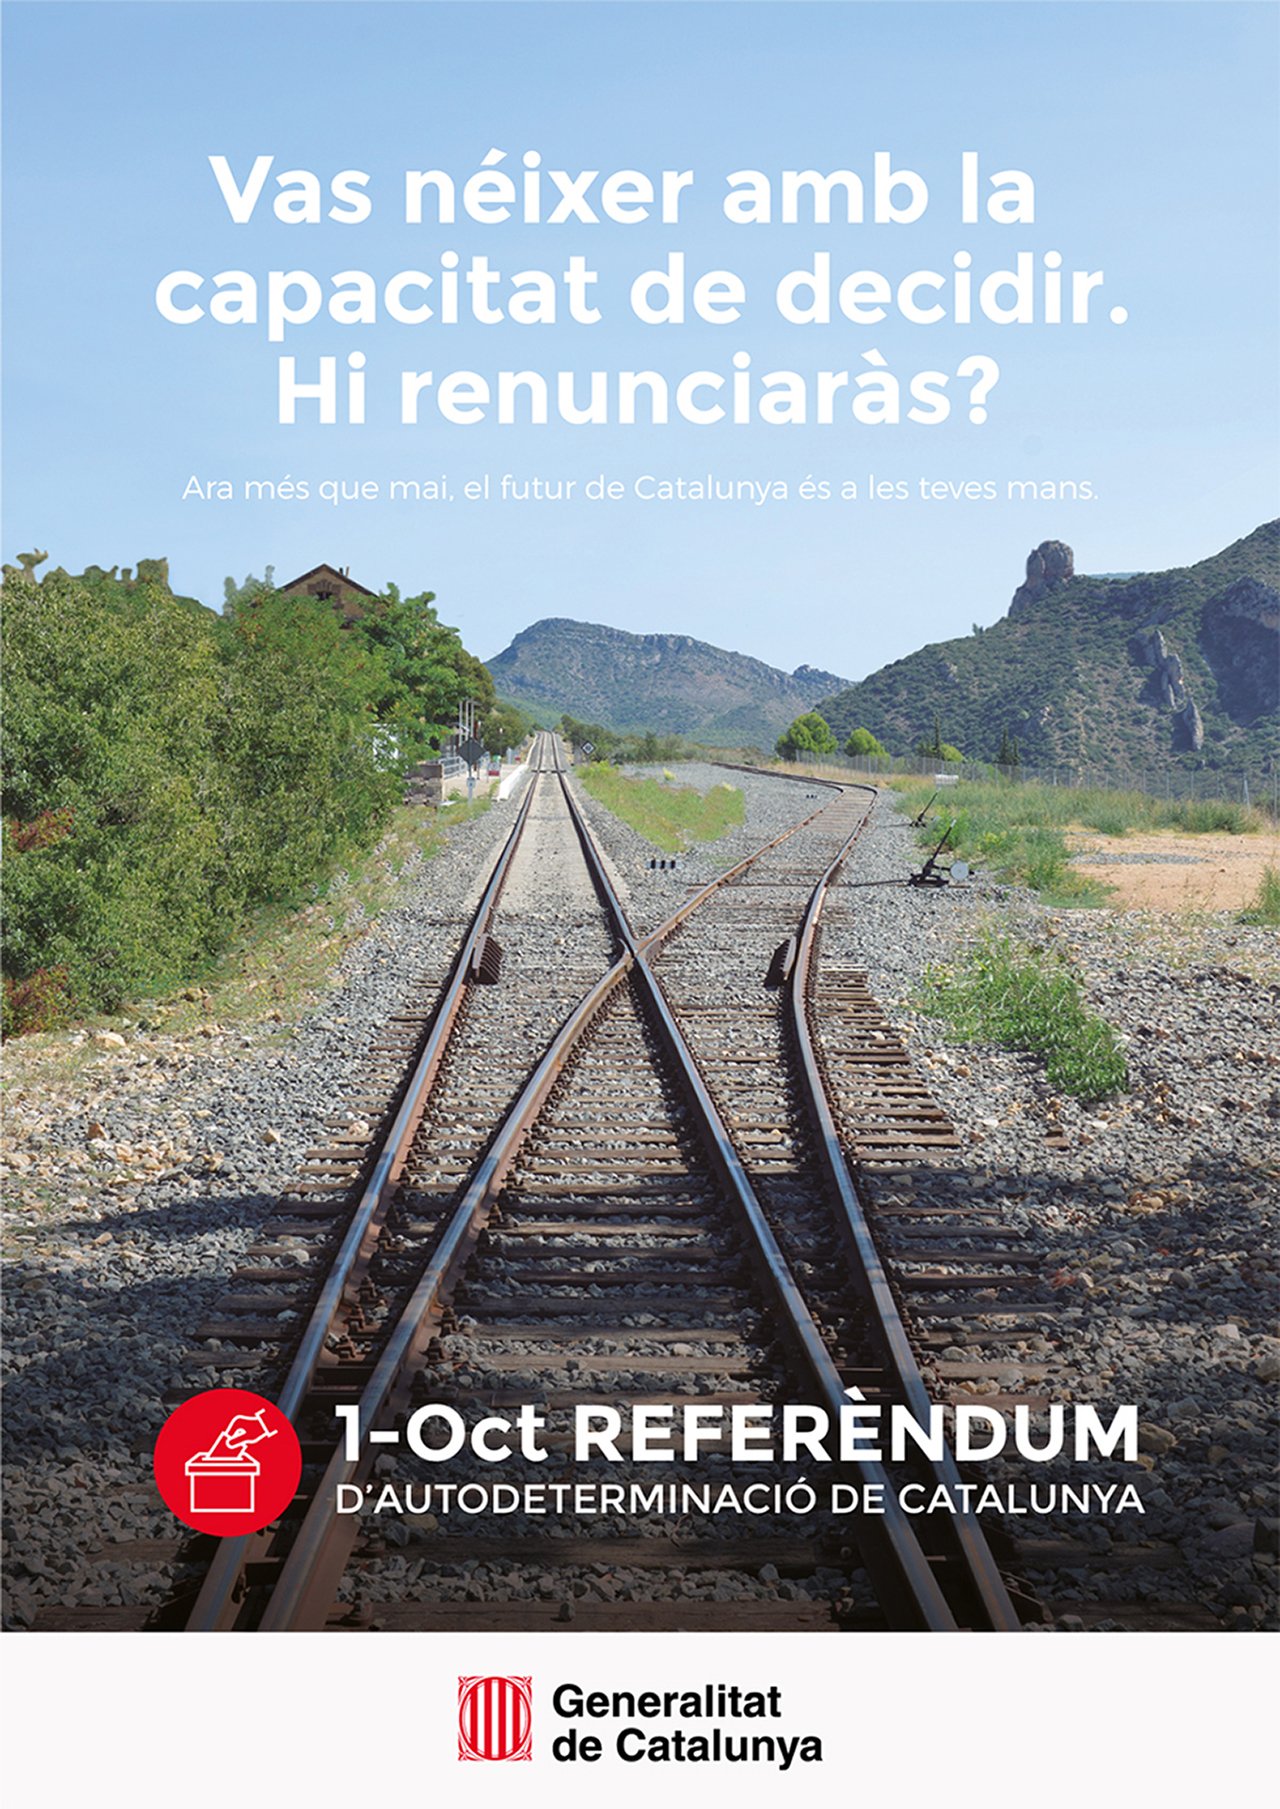 Catalan government responds to Civil Guard by reopening referendum website